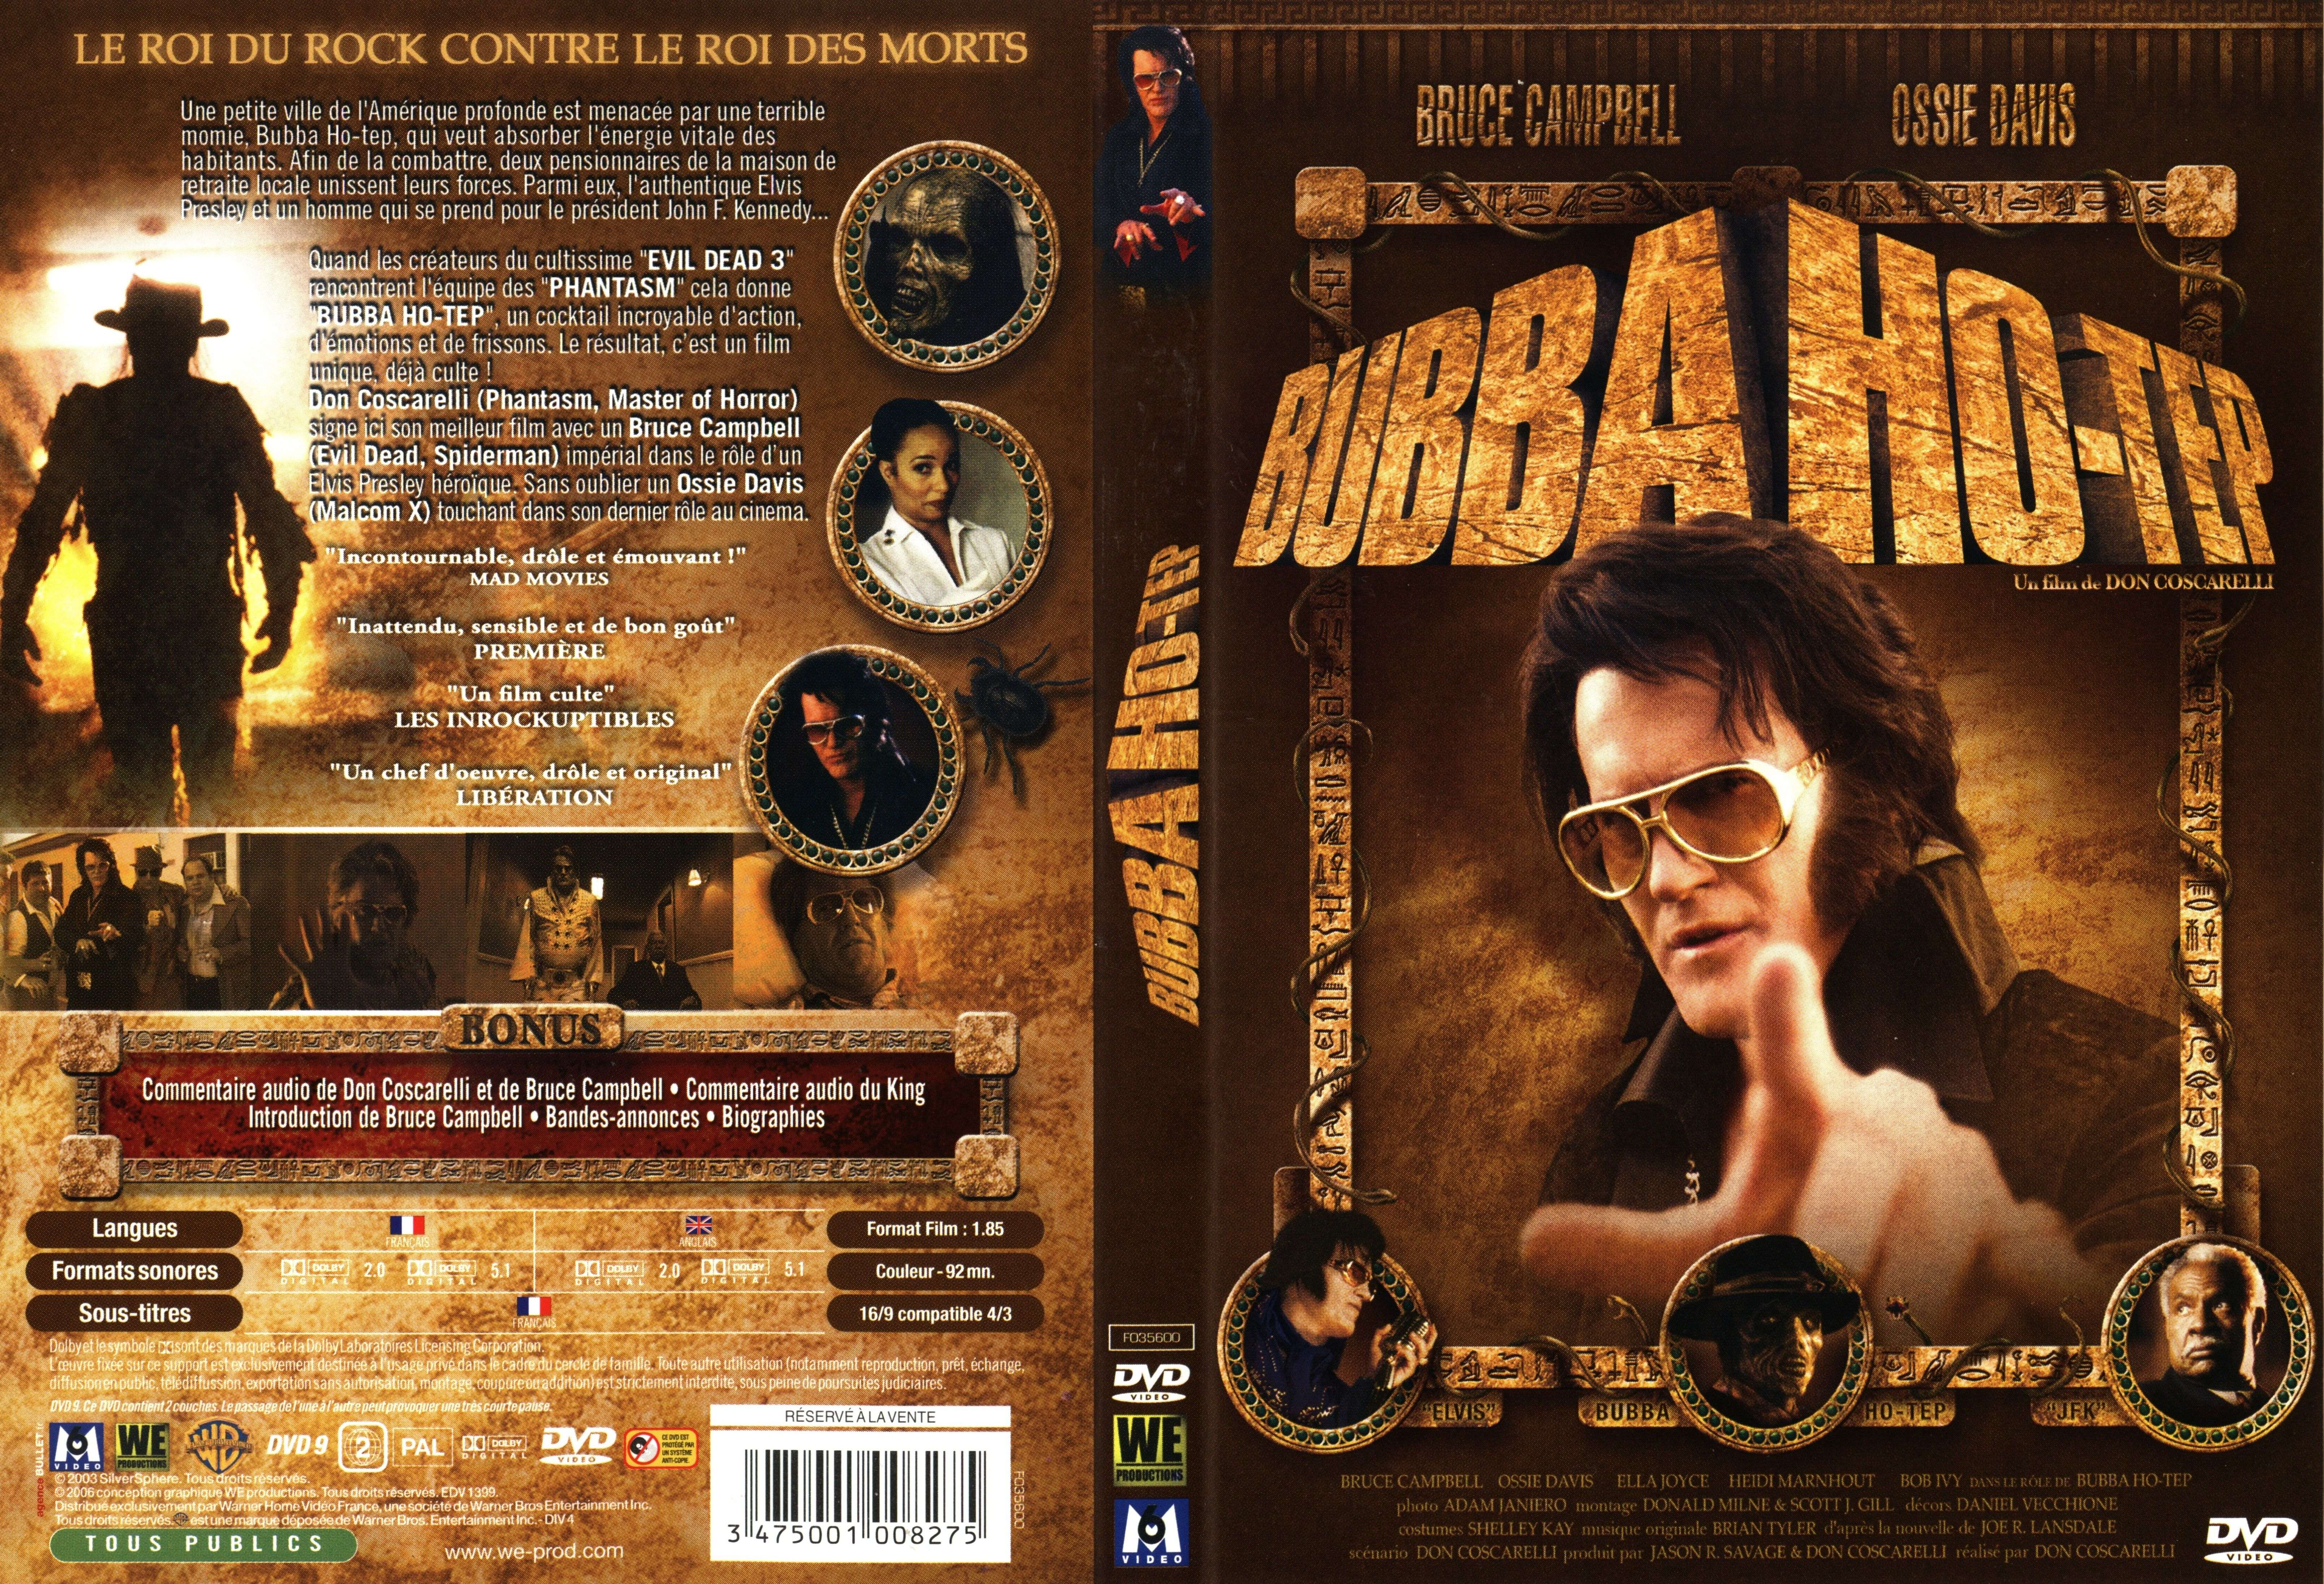 Jaquette DVD Bubba Ho-Tep